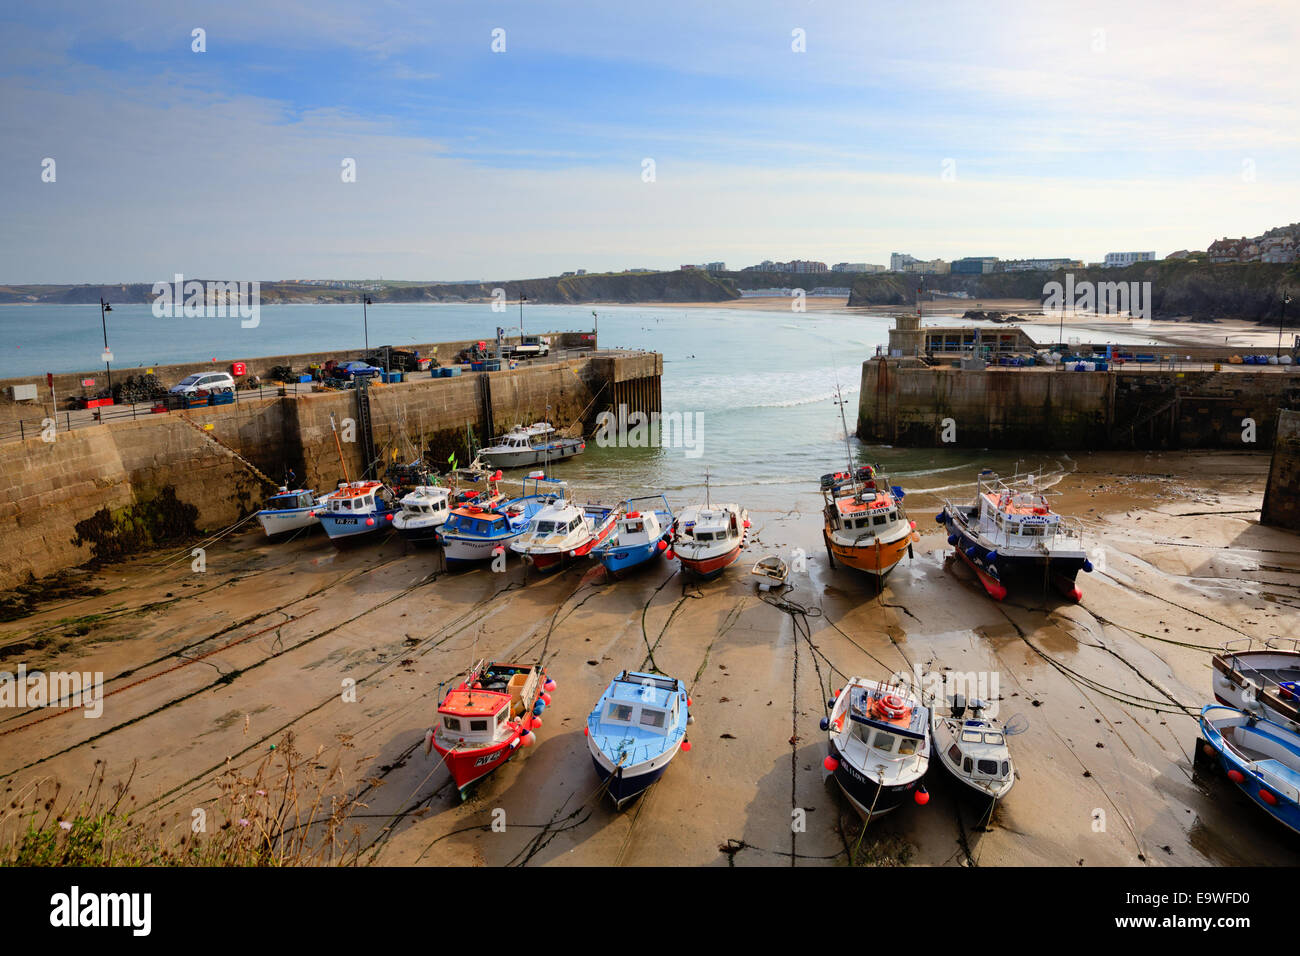 View of Newquay harbour North Cornwall England UK with boats and sandy beach Stock Photo